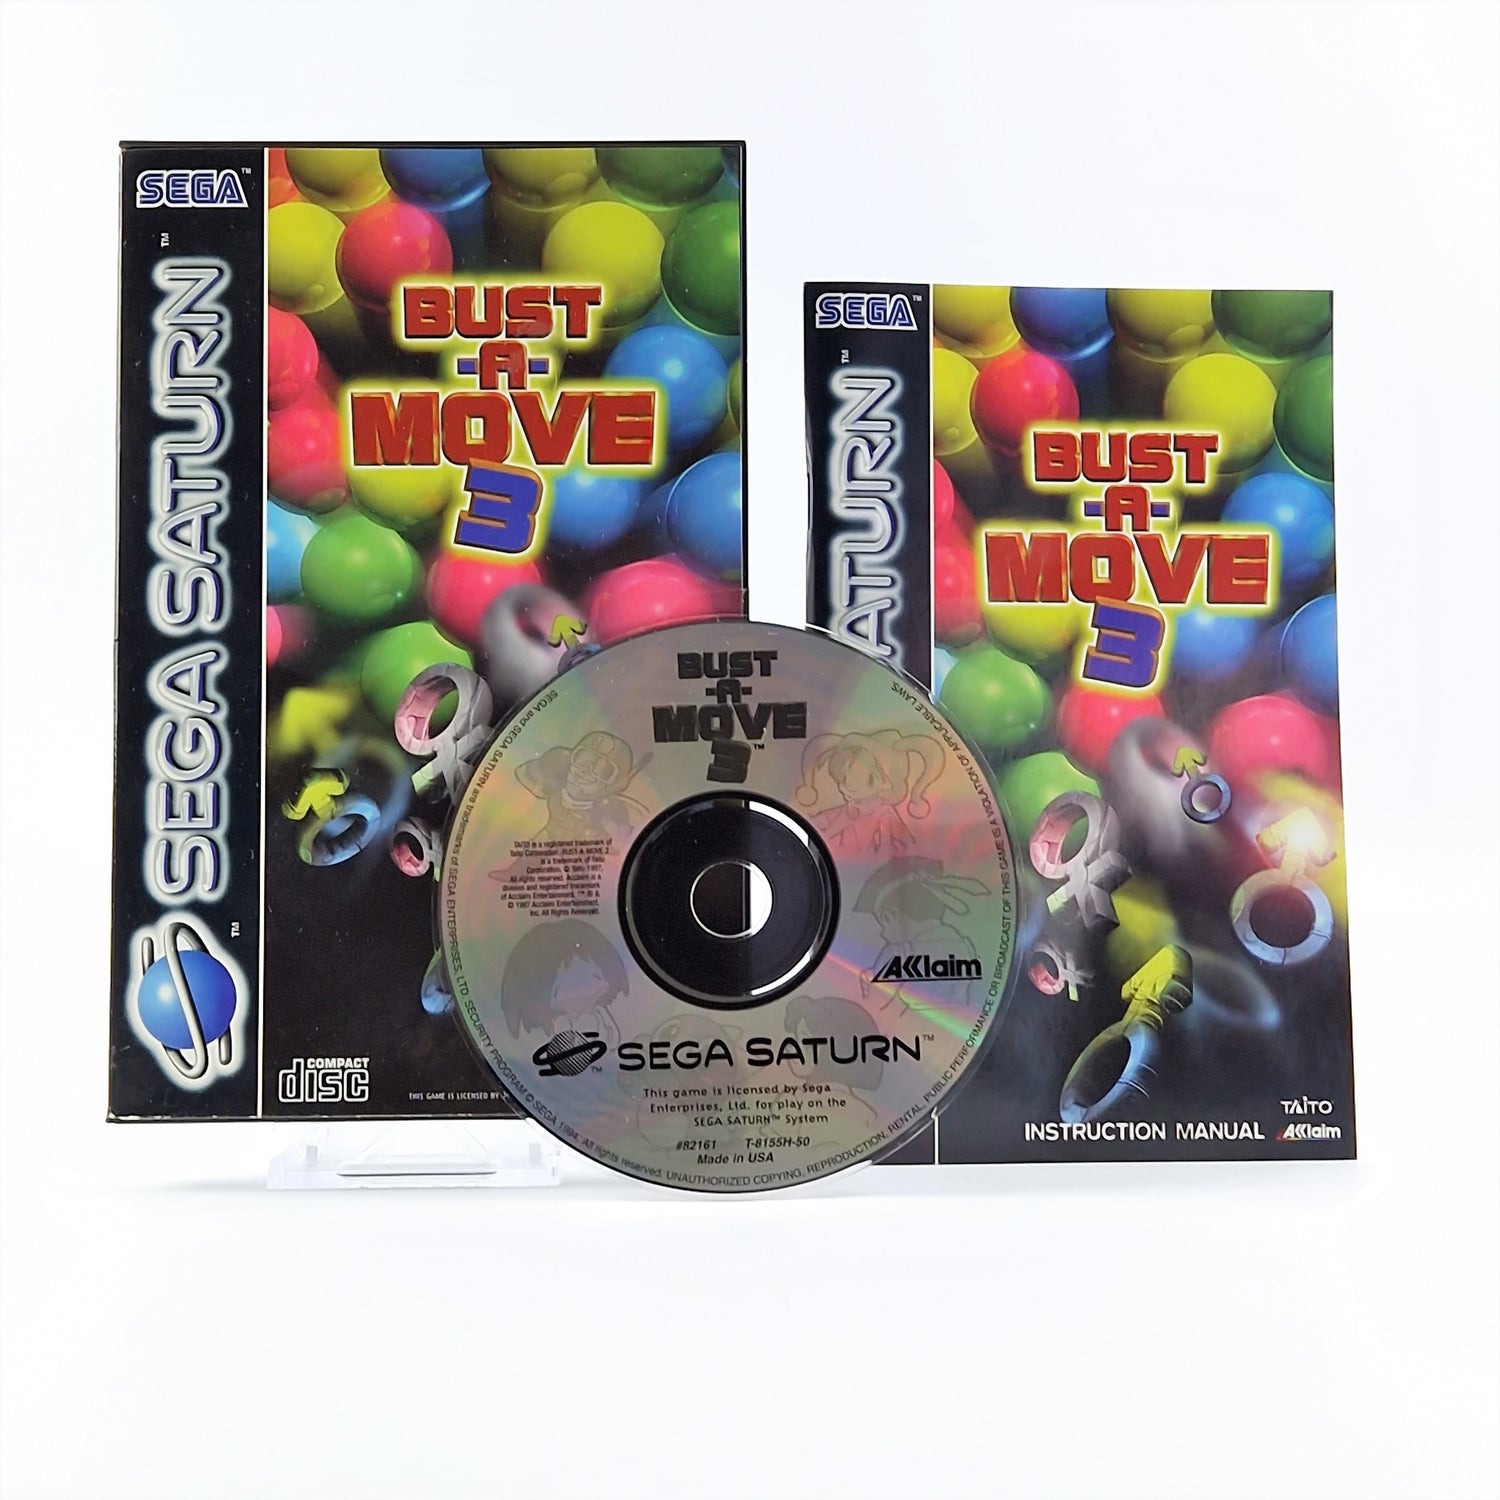 Sega Saturn Game: Bust-A-Move 3 - OVP Instructions CD PAL Disc Game